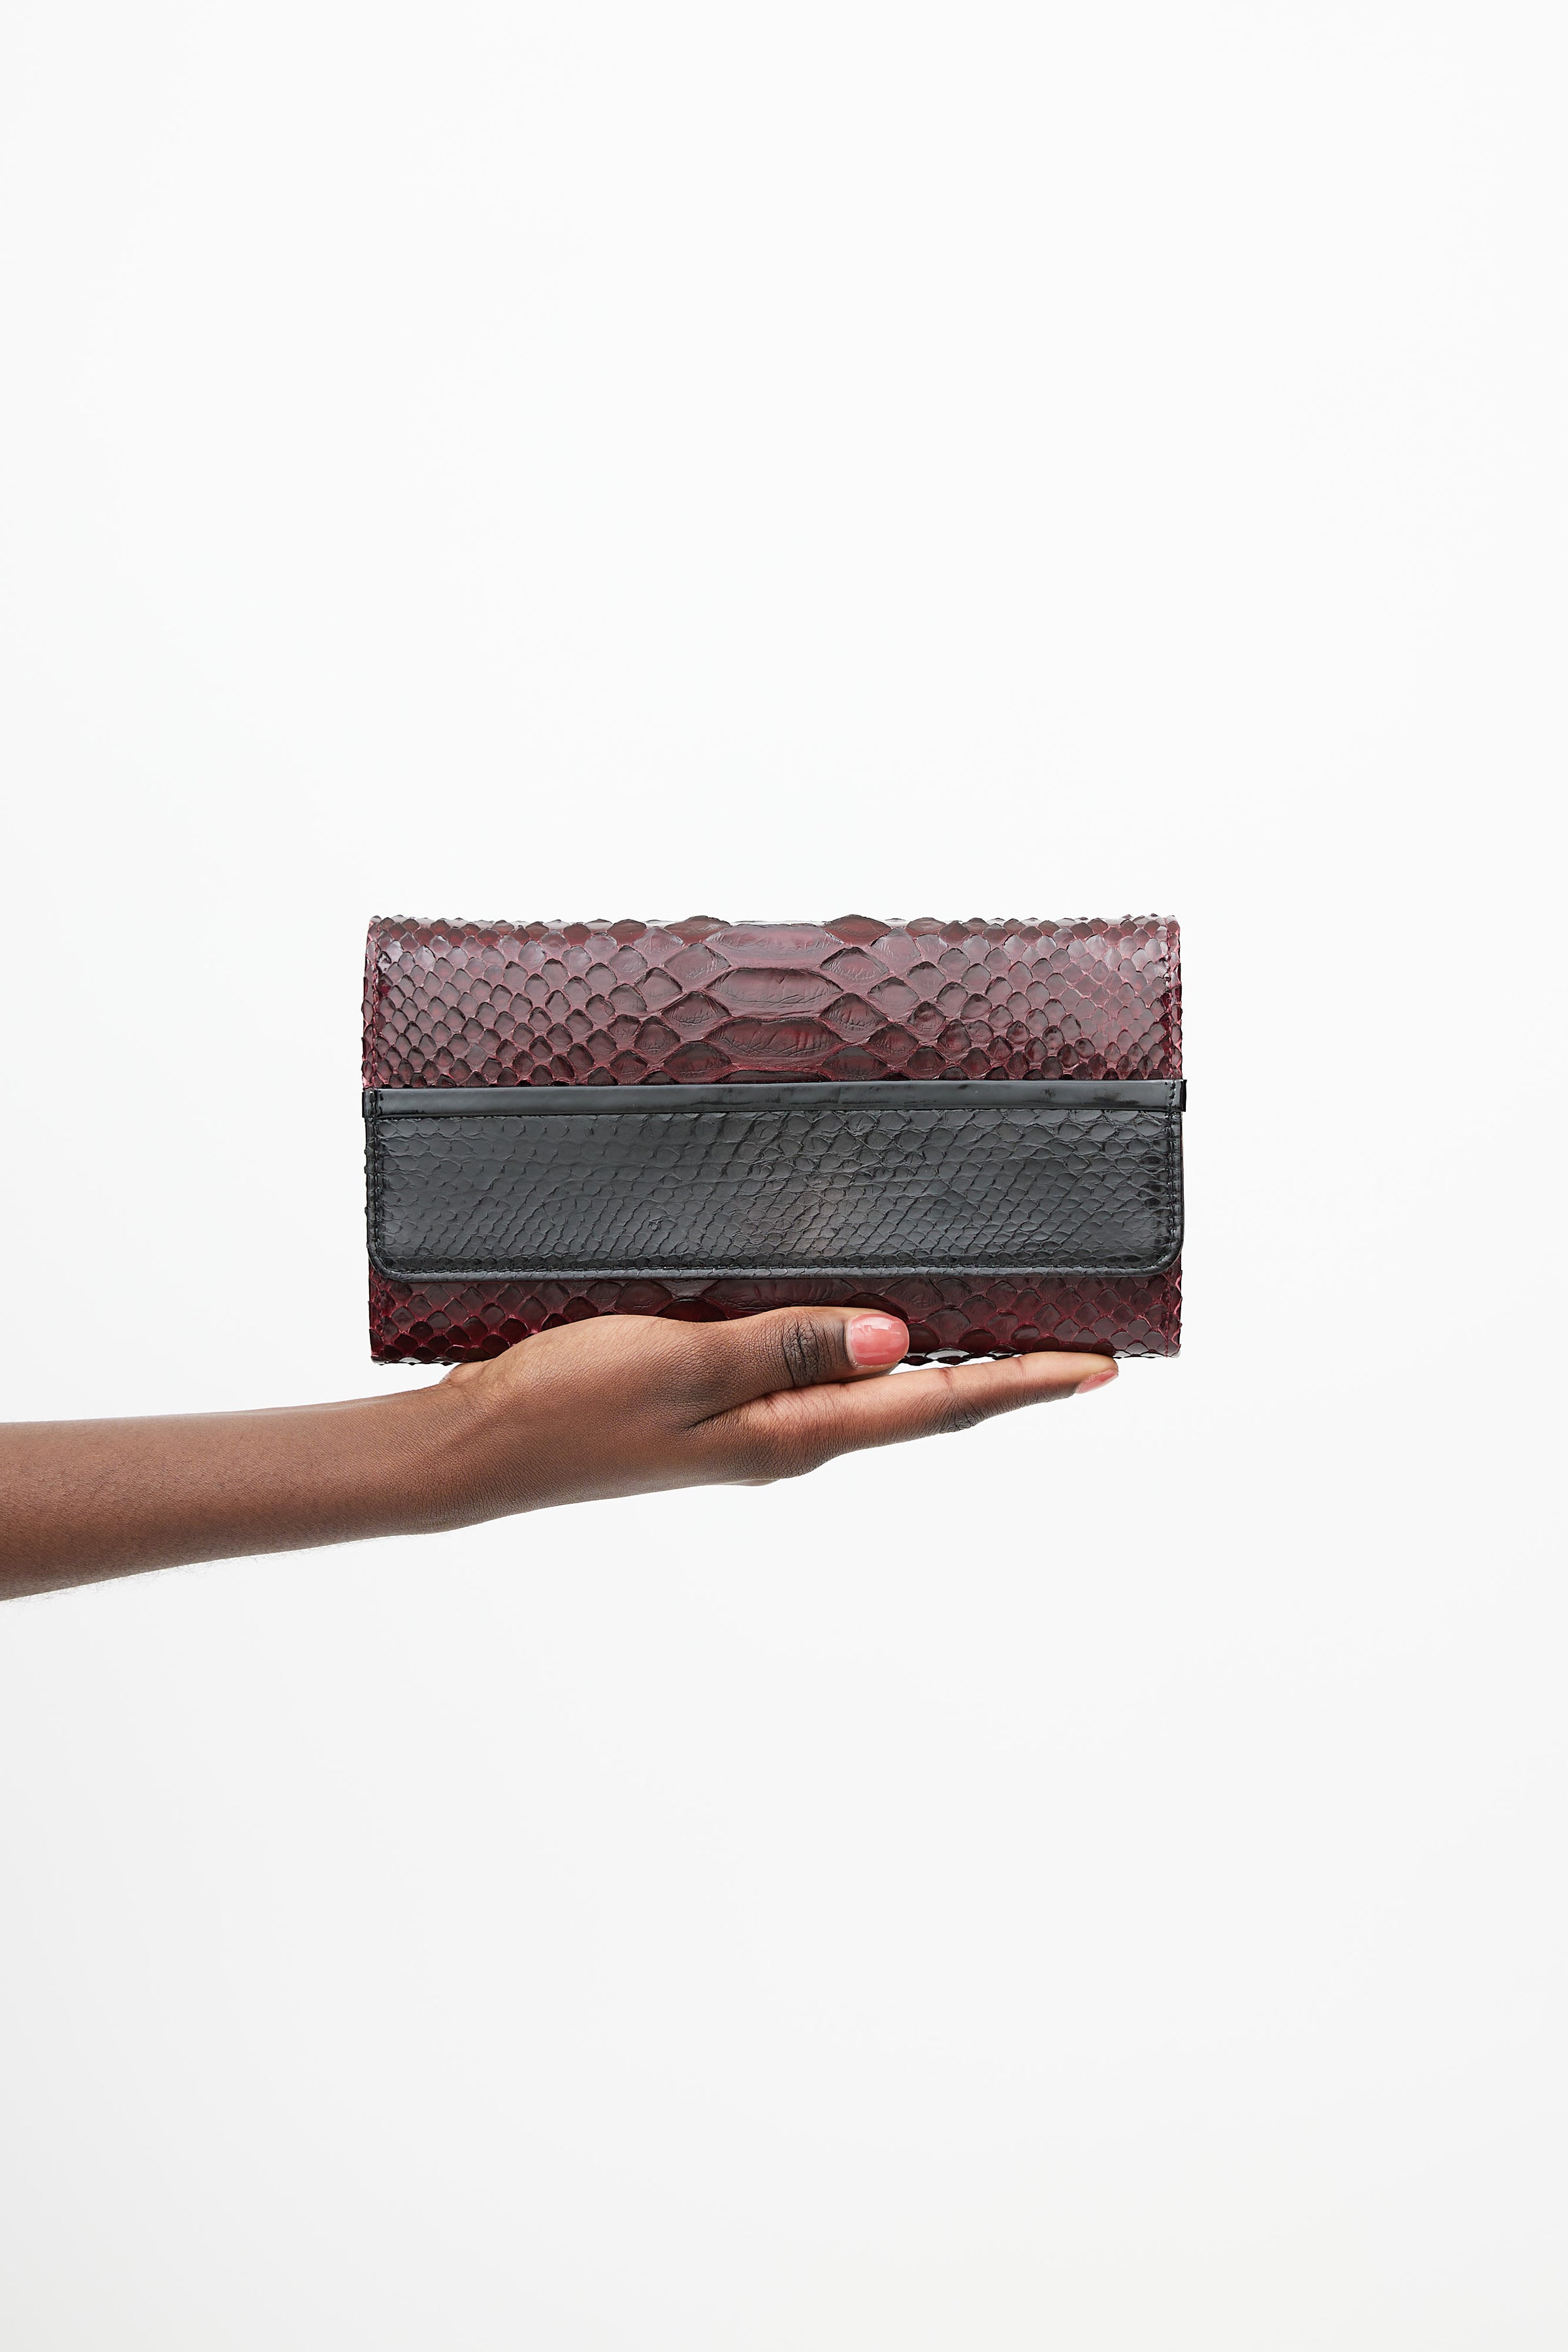 Louis Vuitton - Authenticated Coin Card Holder Small Bag - Crocodile Brown Crocodile for Men, Never Worn